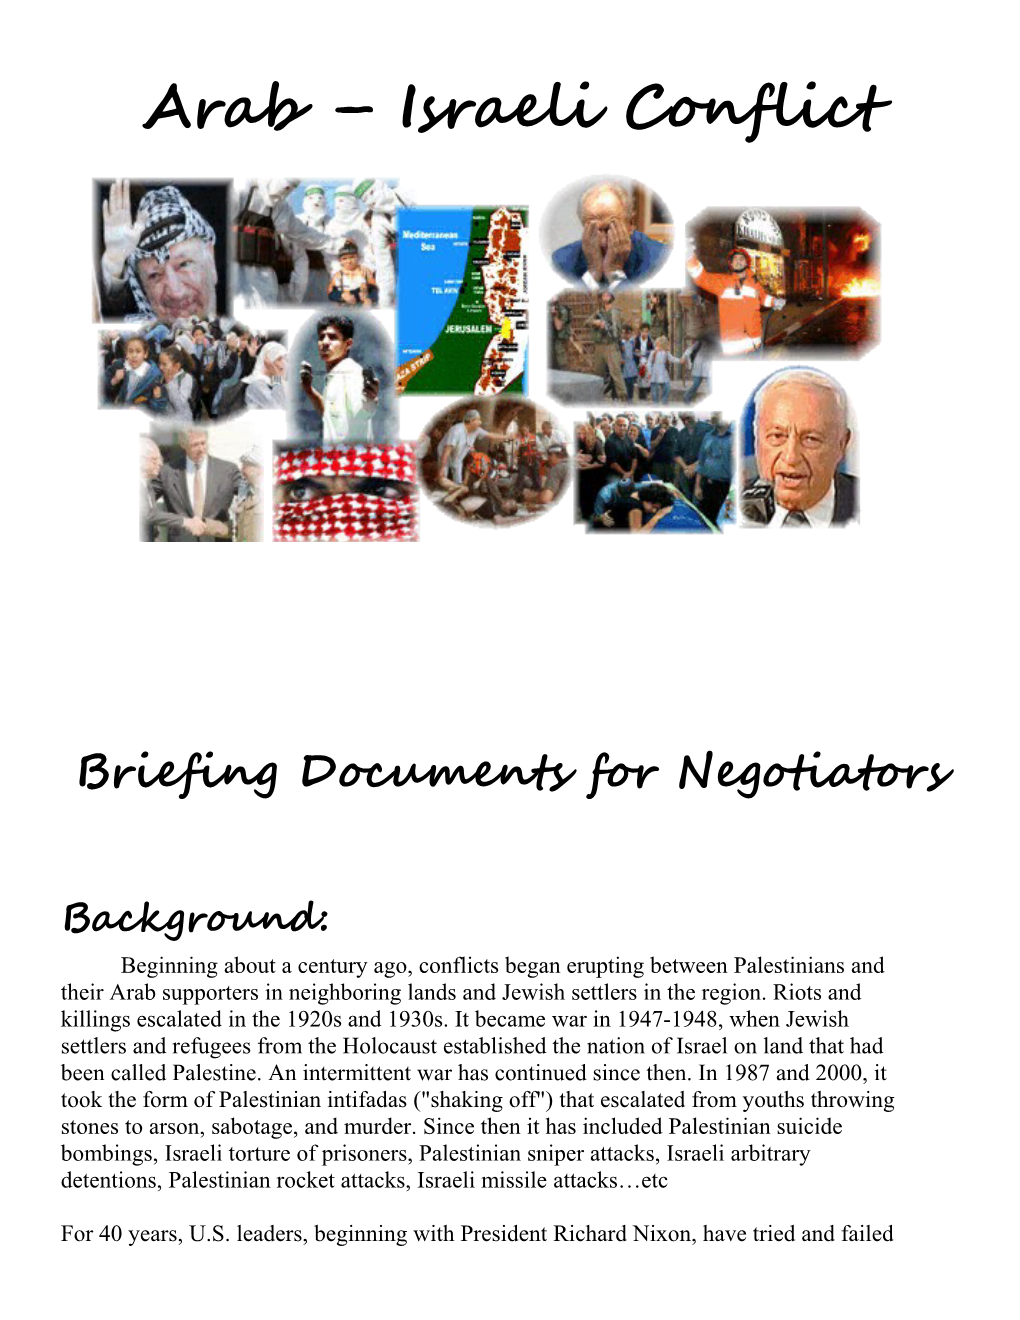 Briefing Documents for Negotiators